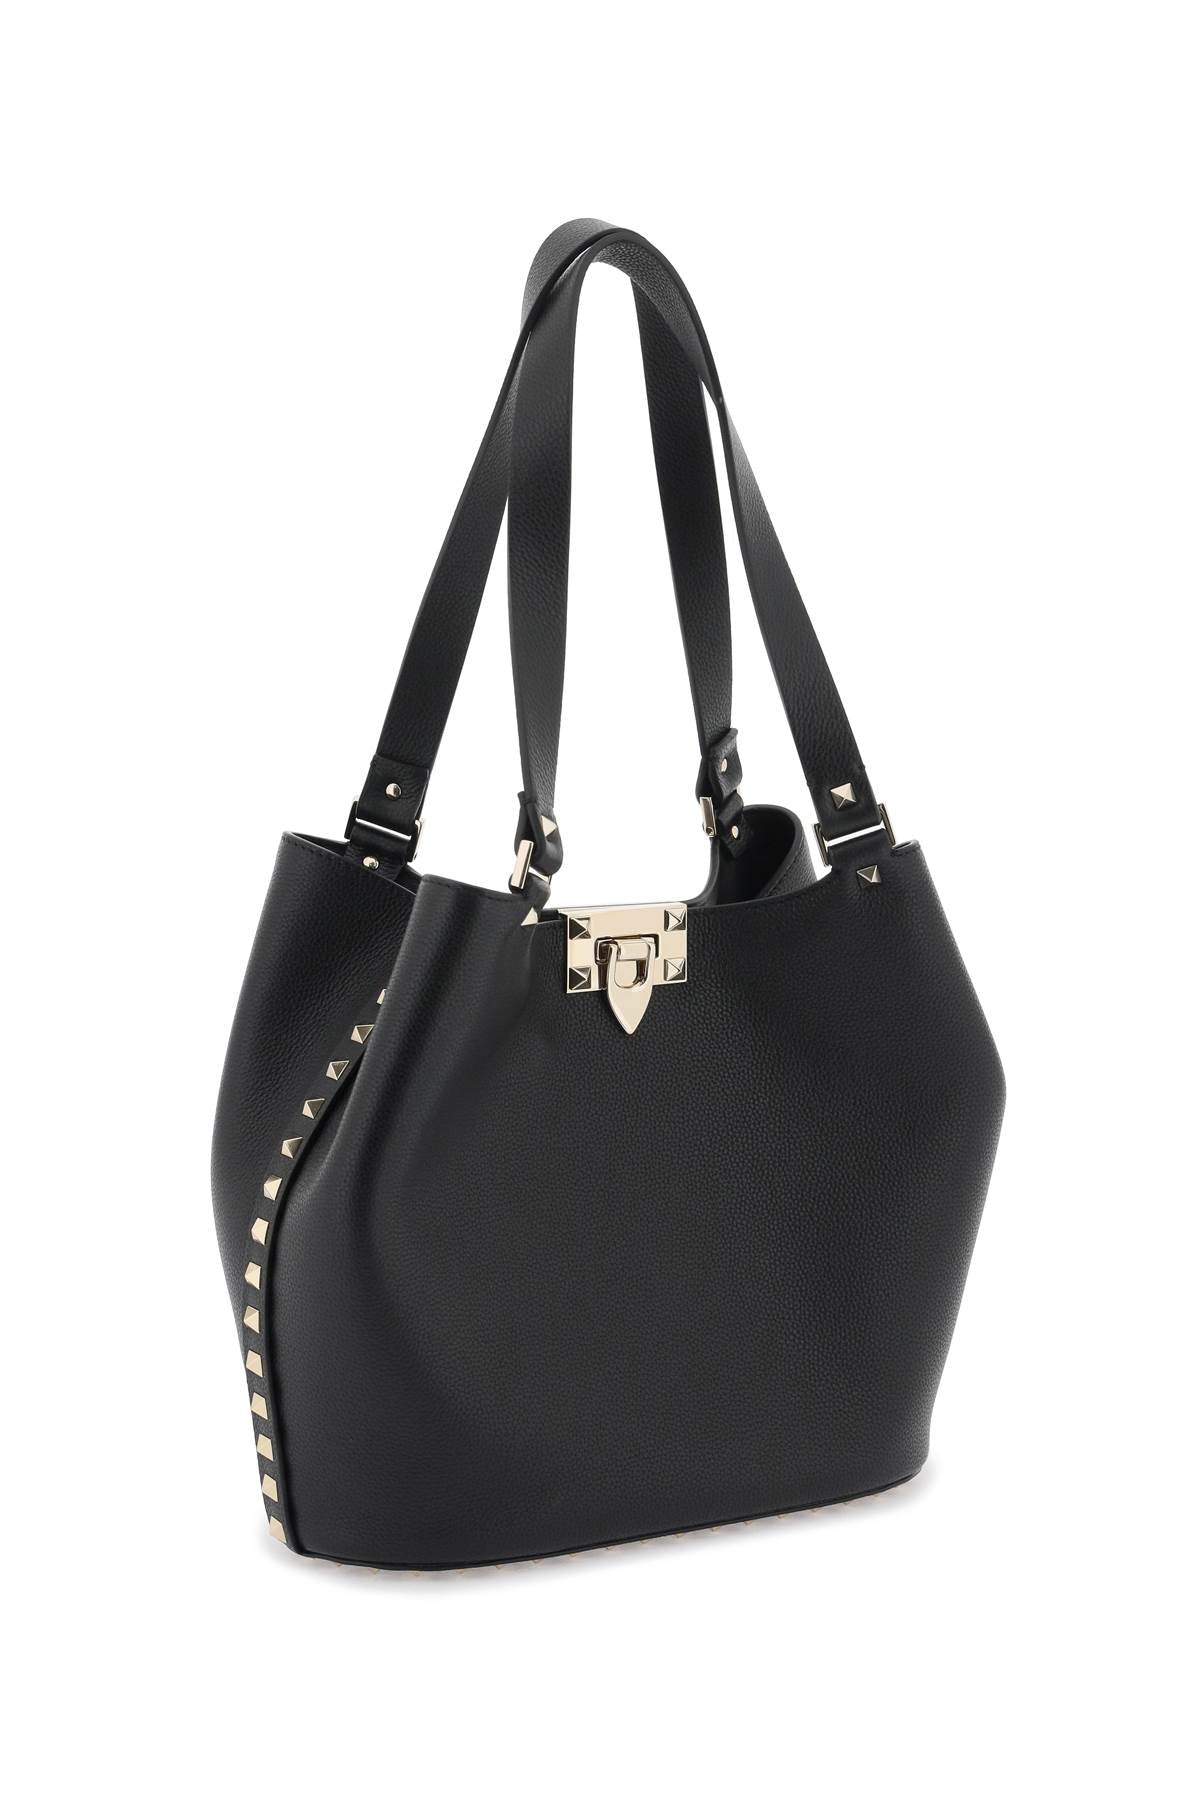 Iconic Studs Tote Handbag in Black Hammered Leather for Women - SS24